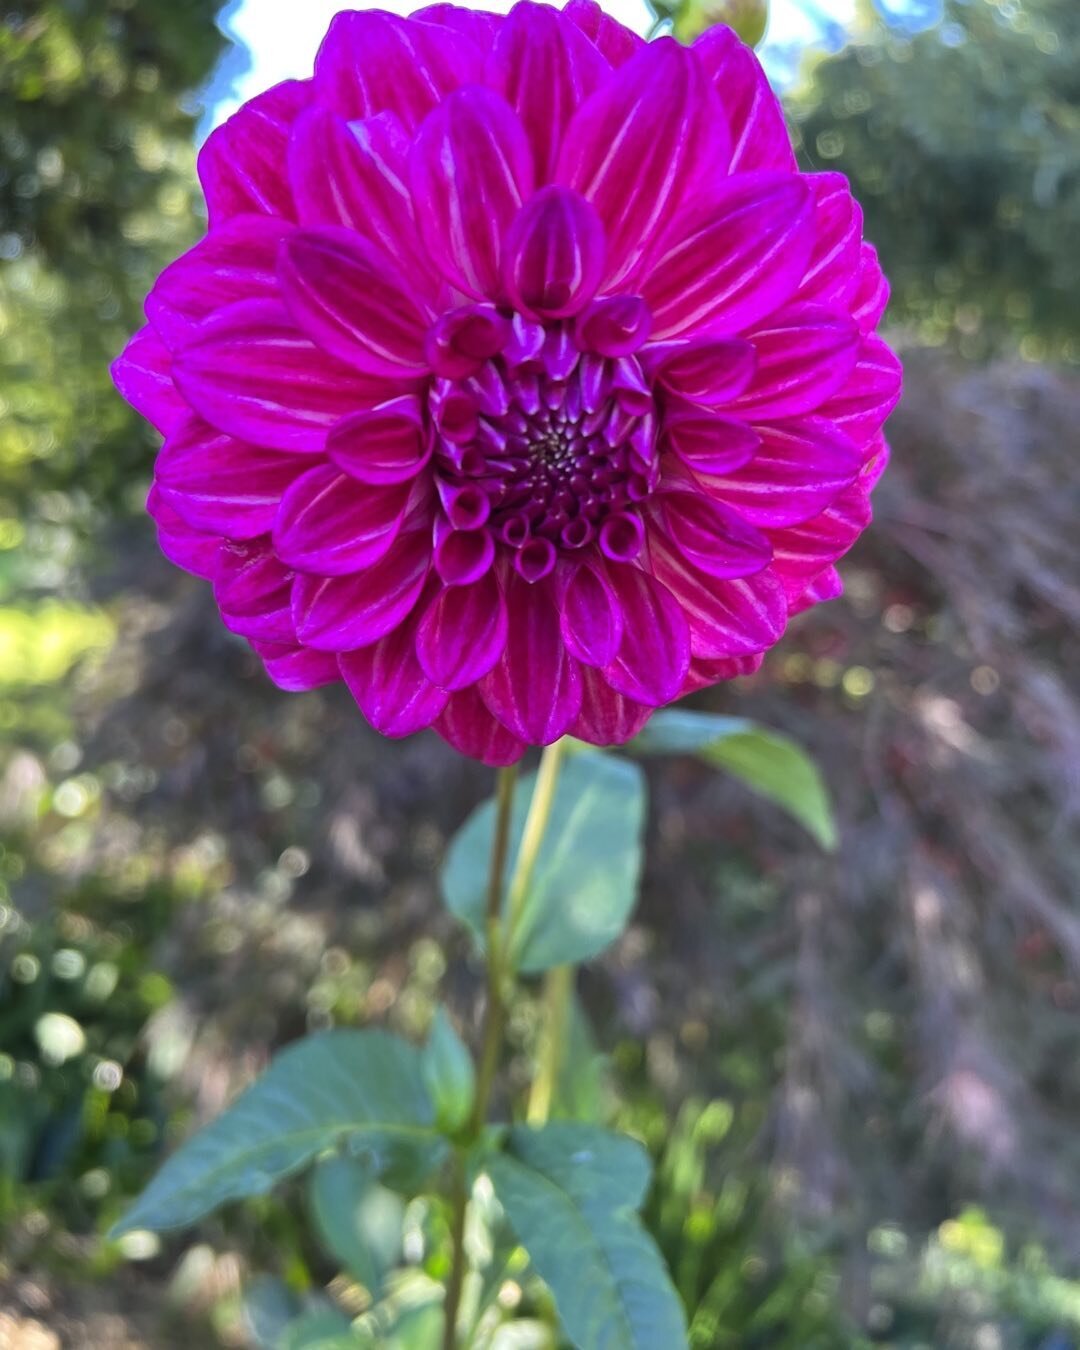 Standing 1.5m high this eye popping #Dahlia_Kashmir adds another stand out colour to the warmer tones of Autumn here on the Tablelands of Central NSW. #year_round_colour @landscapedesign in #orangeNSW @plant-selection matters in every way 🤩